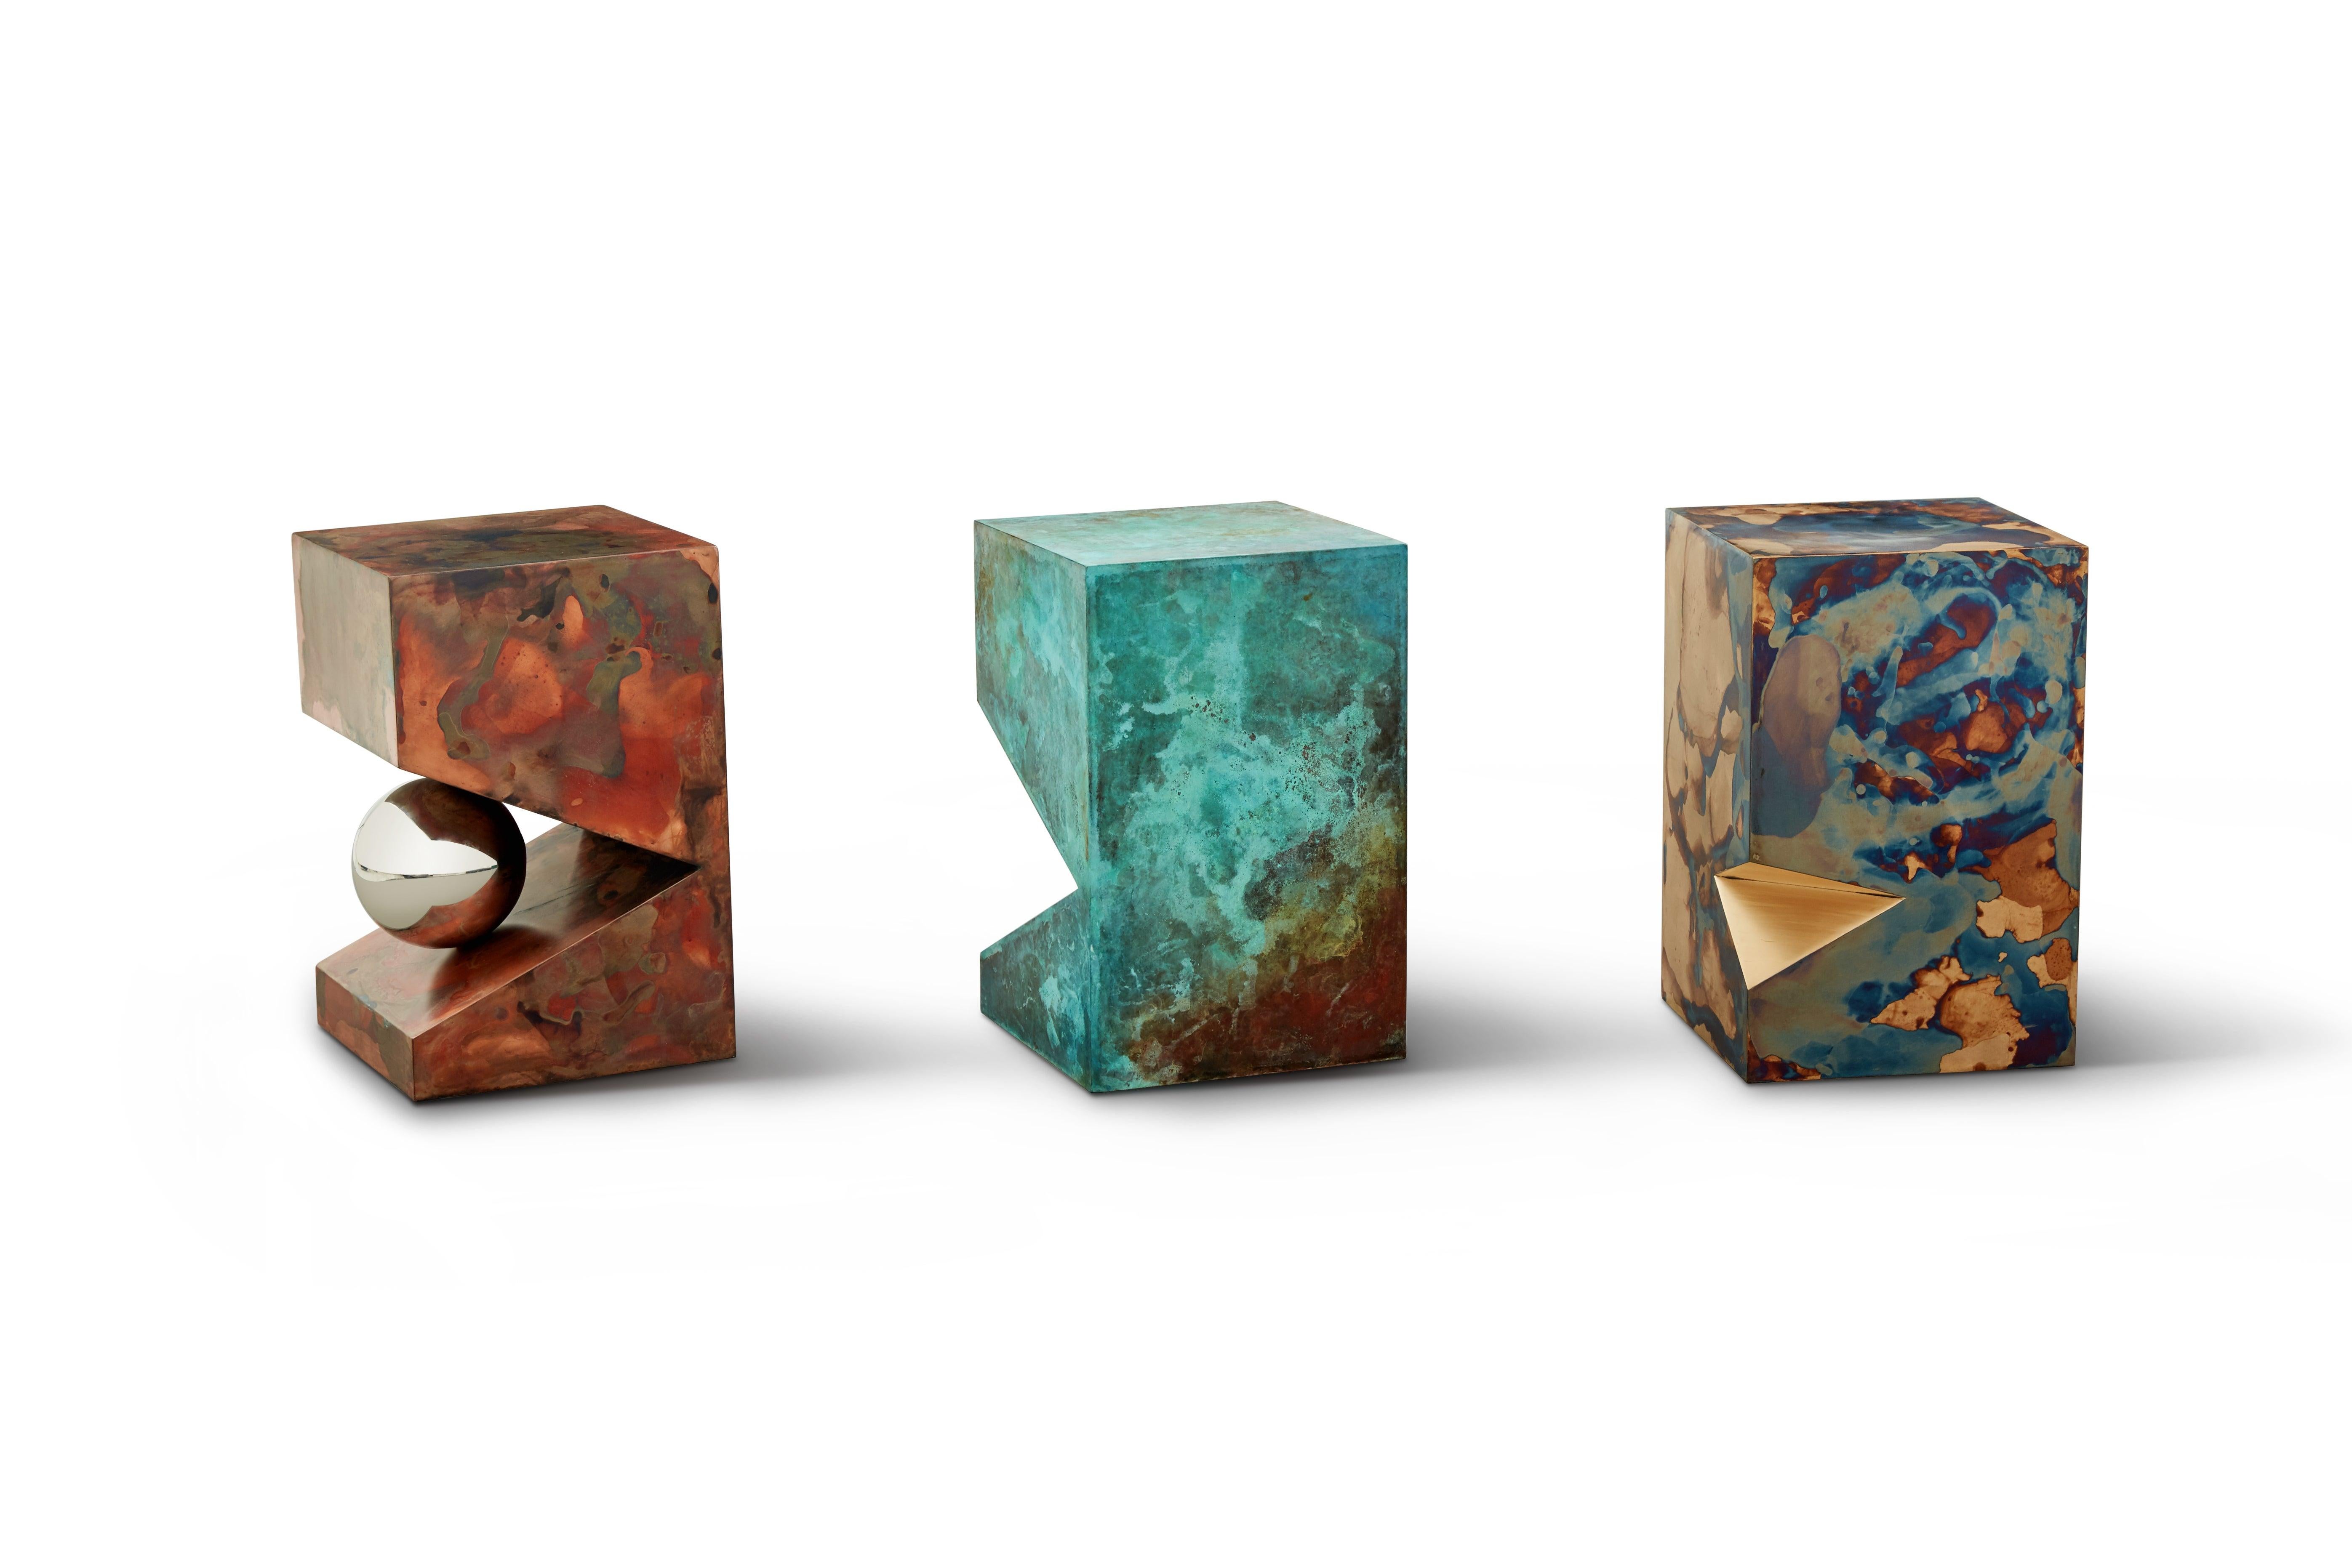 The colorful stool or side table is designed and made by artist Daishi Luo (Shanghai, China). It is fully customizable in size and color.

Spontaneous growth of copper is the latest series in Daishi's Bio-design programs. She uses a comprehensive